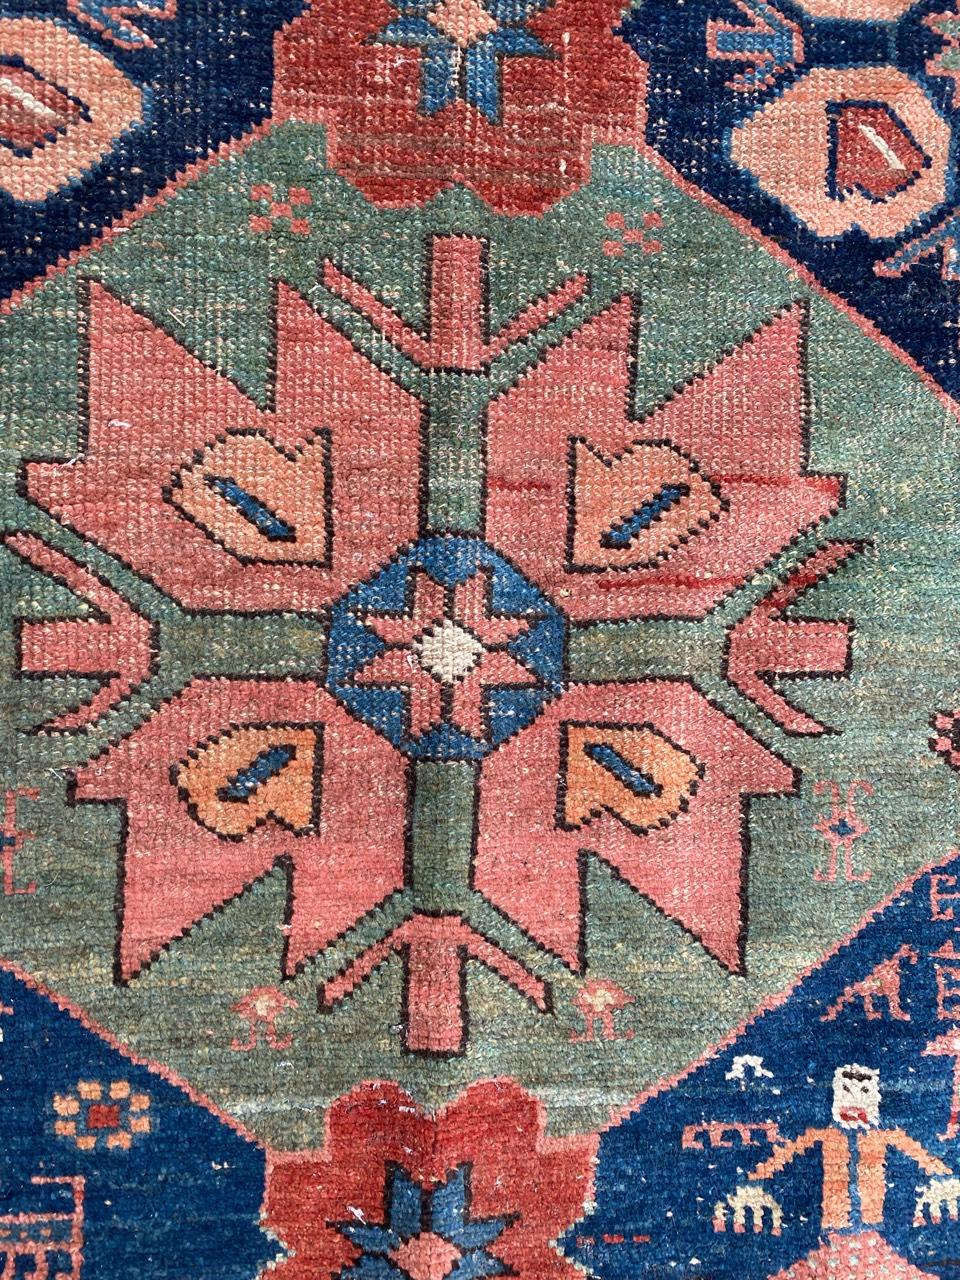 Very beautiful late 19th century tribal rug with a geometrical design and beautiful natural colors with orange, red, blue, green and pink, entirely hand knotted with wool velvet on wool foundation.